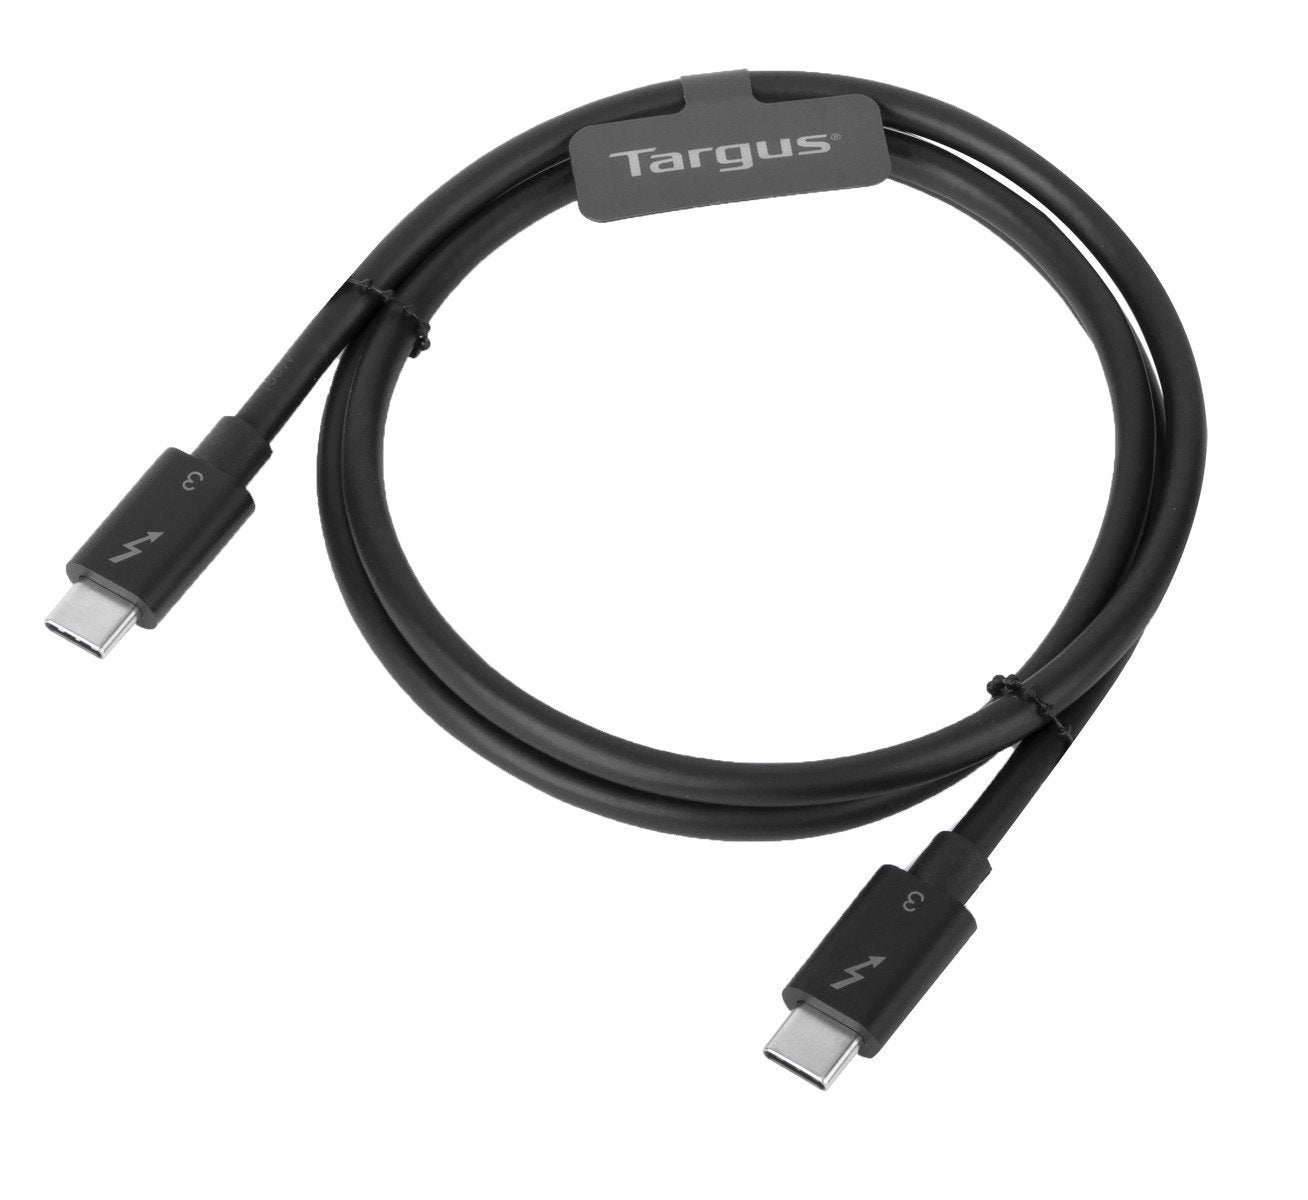 Bluehive USB Type-C to HDMI Adapter for Select Apple & Android Devices